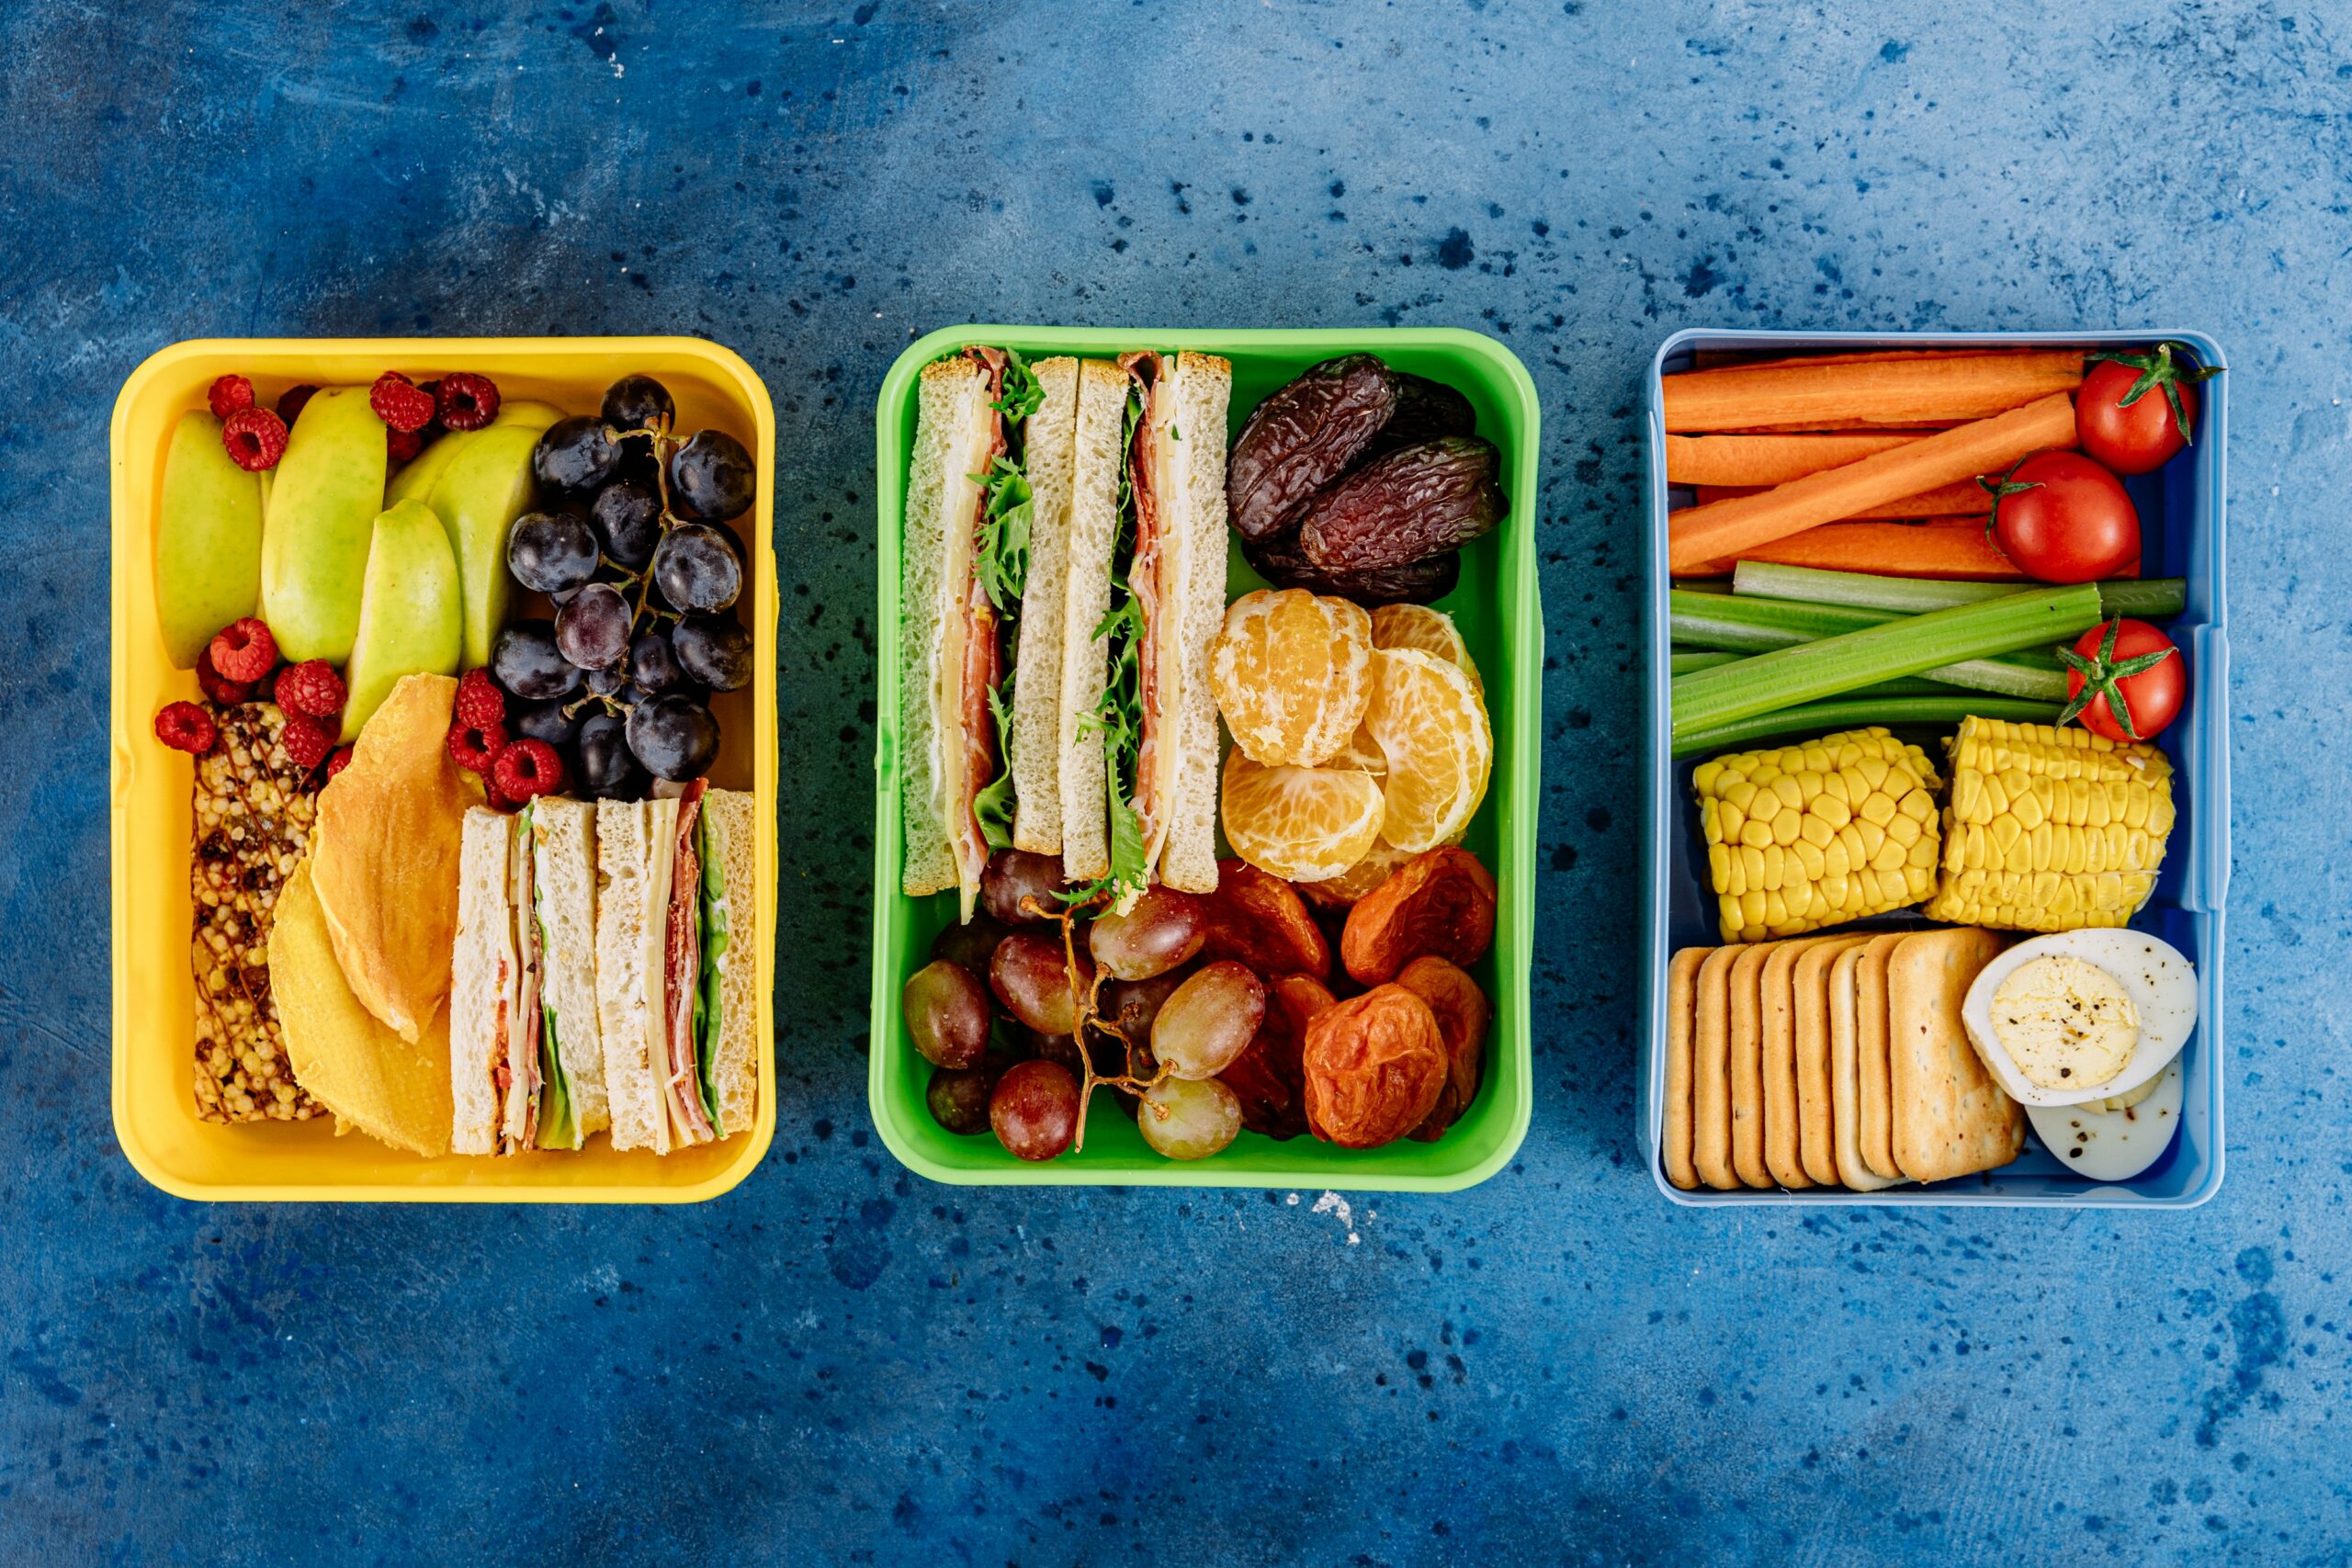 Plan your workweek lunches ahead of time